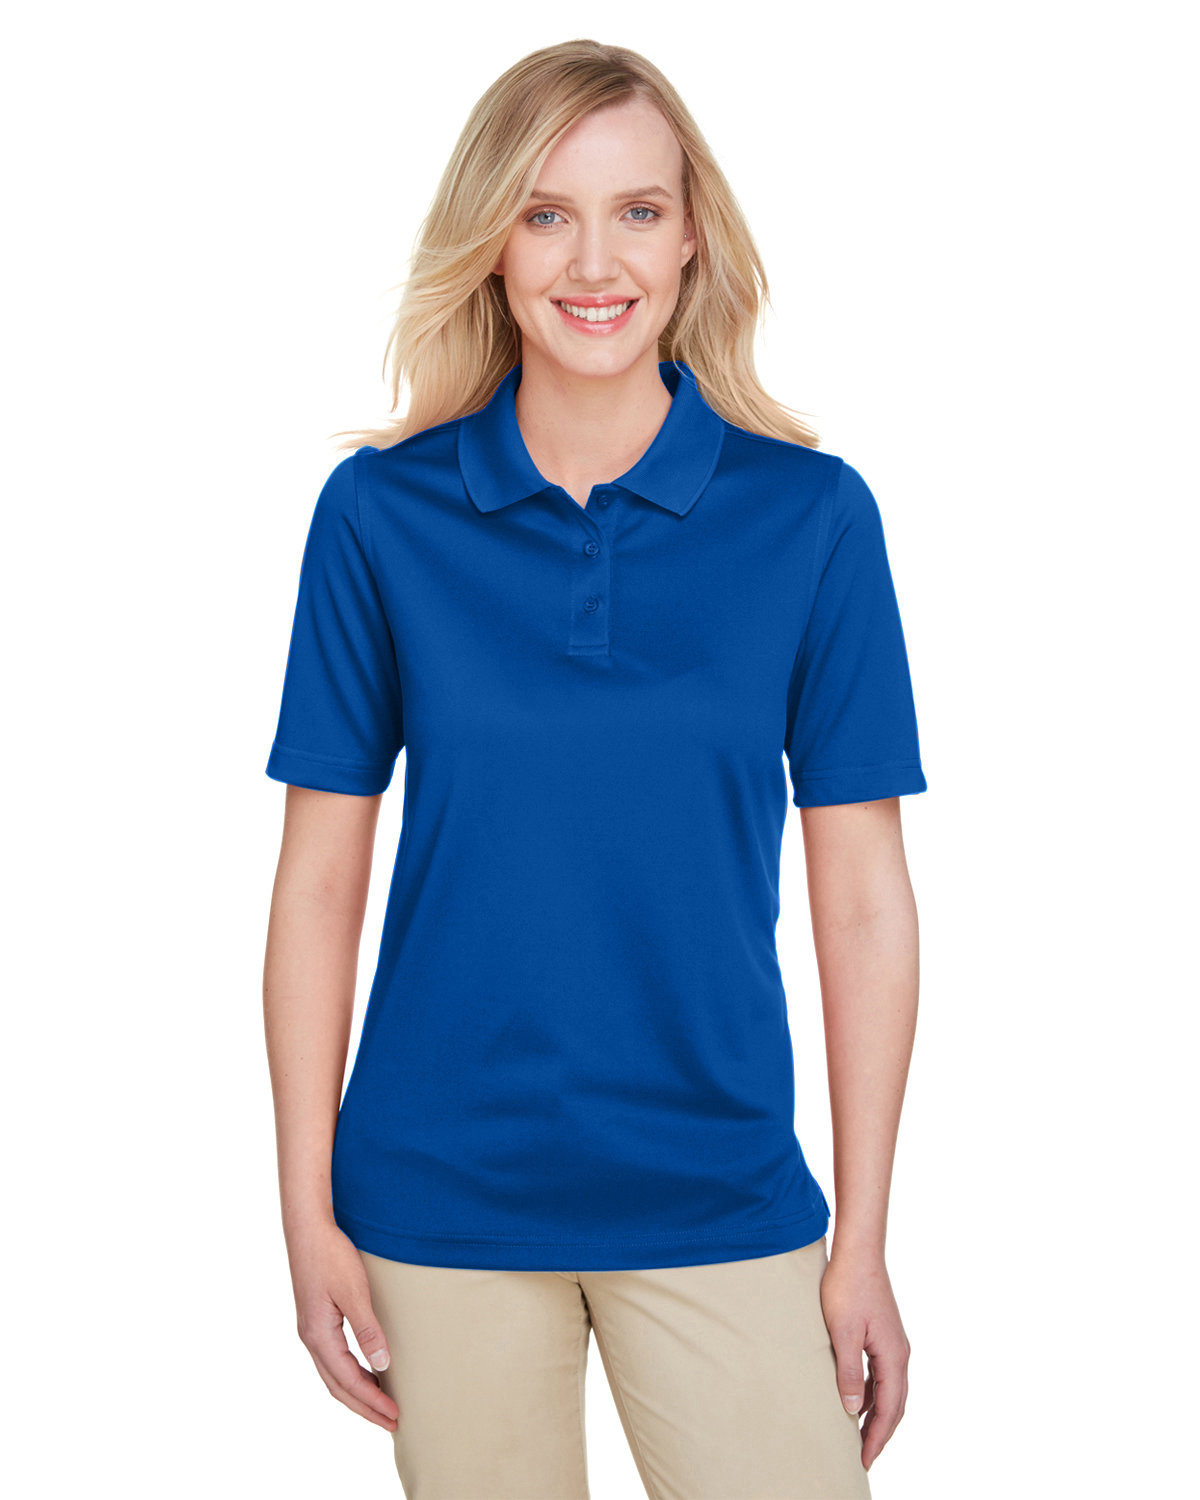 Front view of Ladies’ Advantage Snag Protection Plus Polo